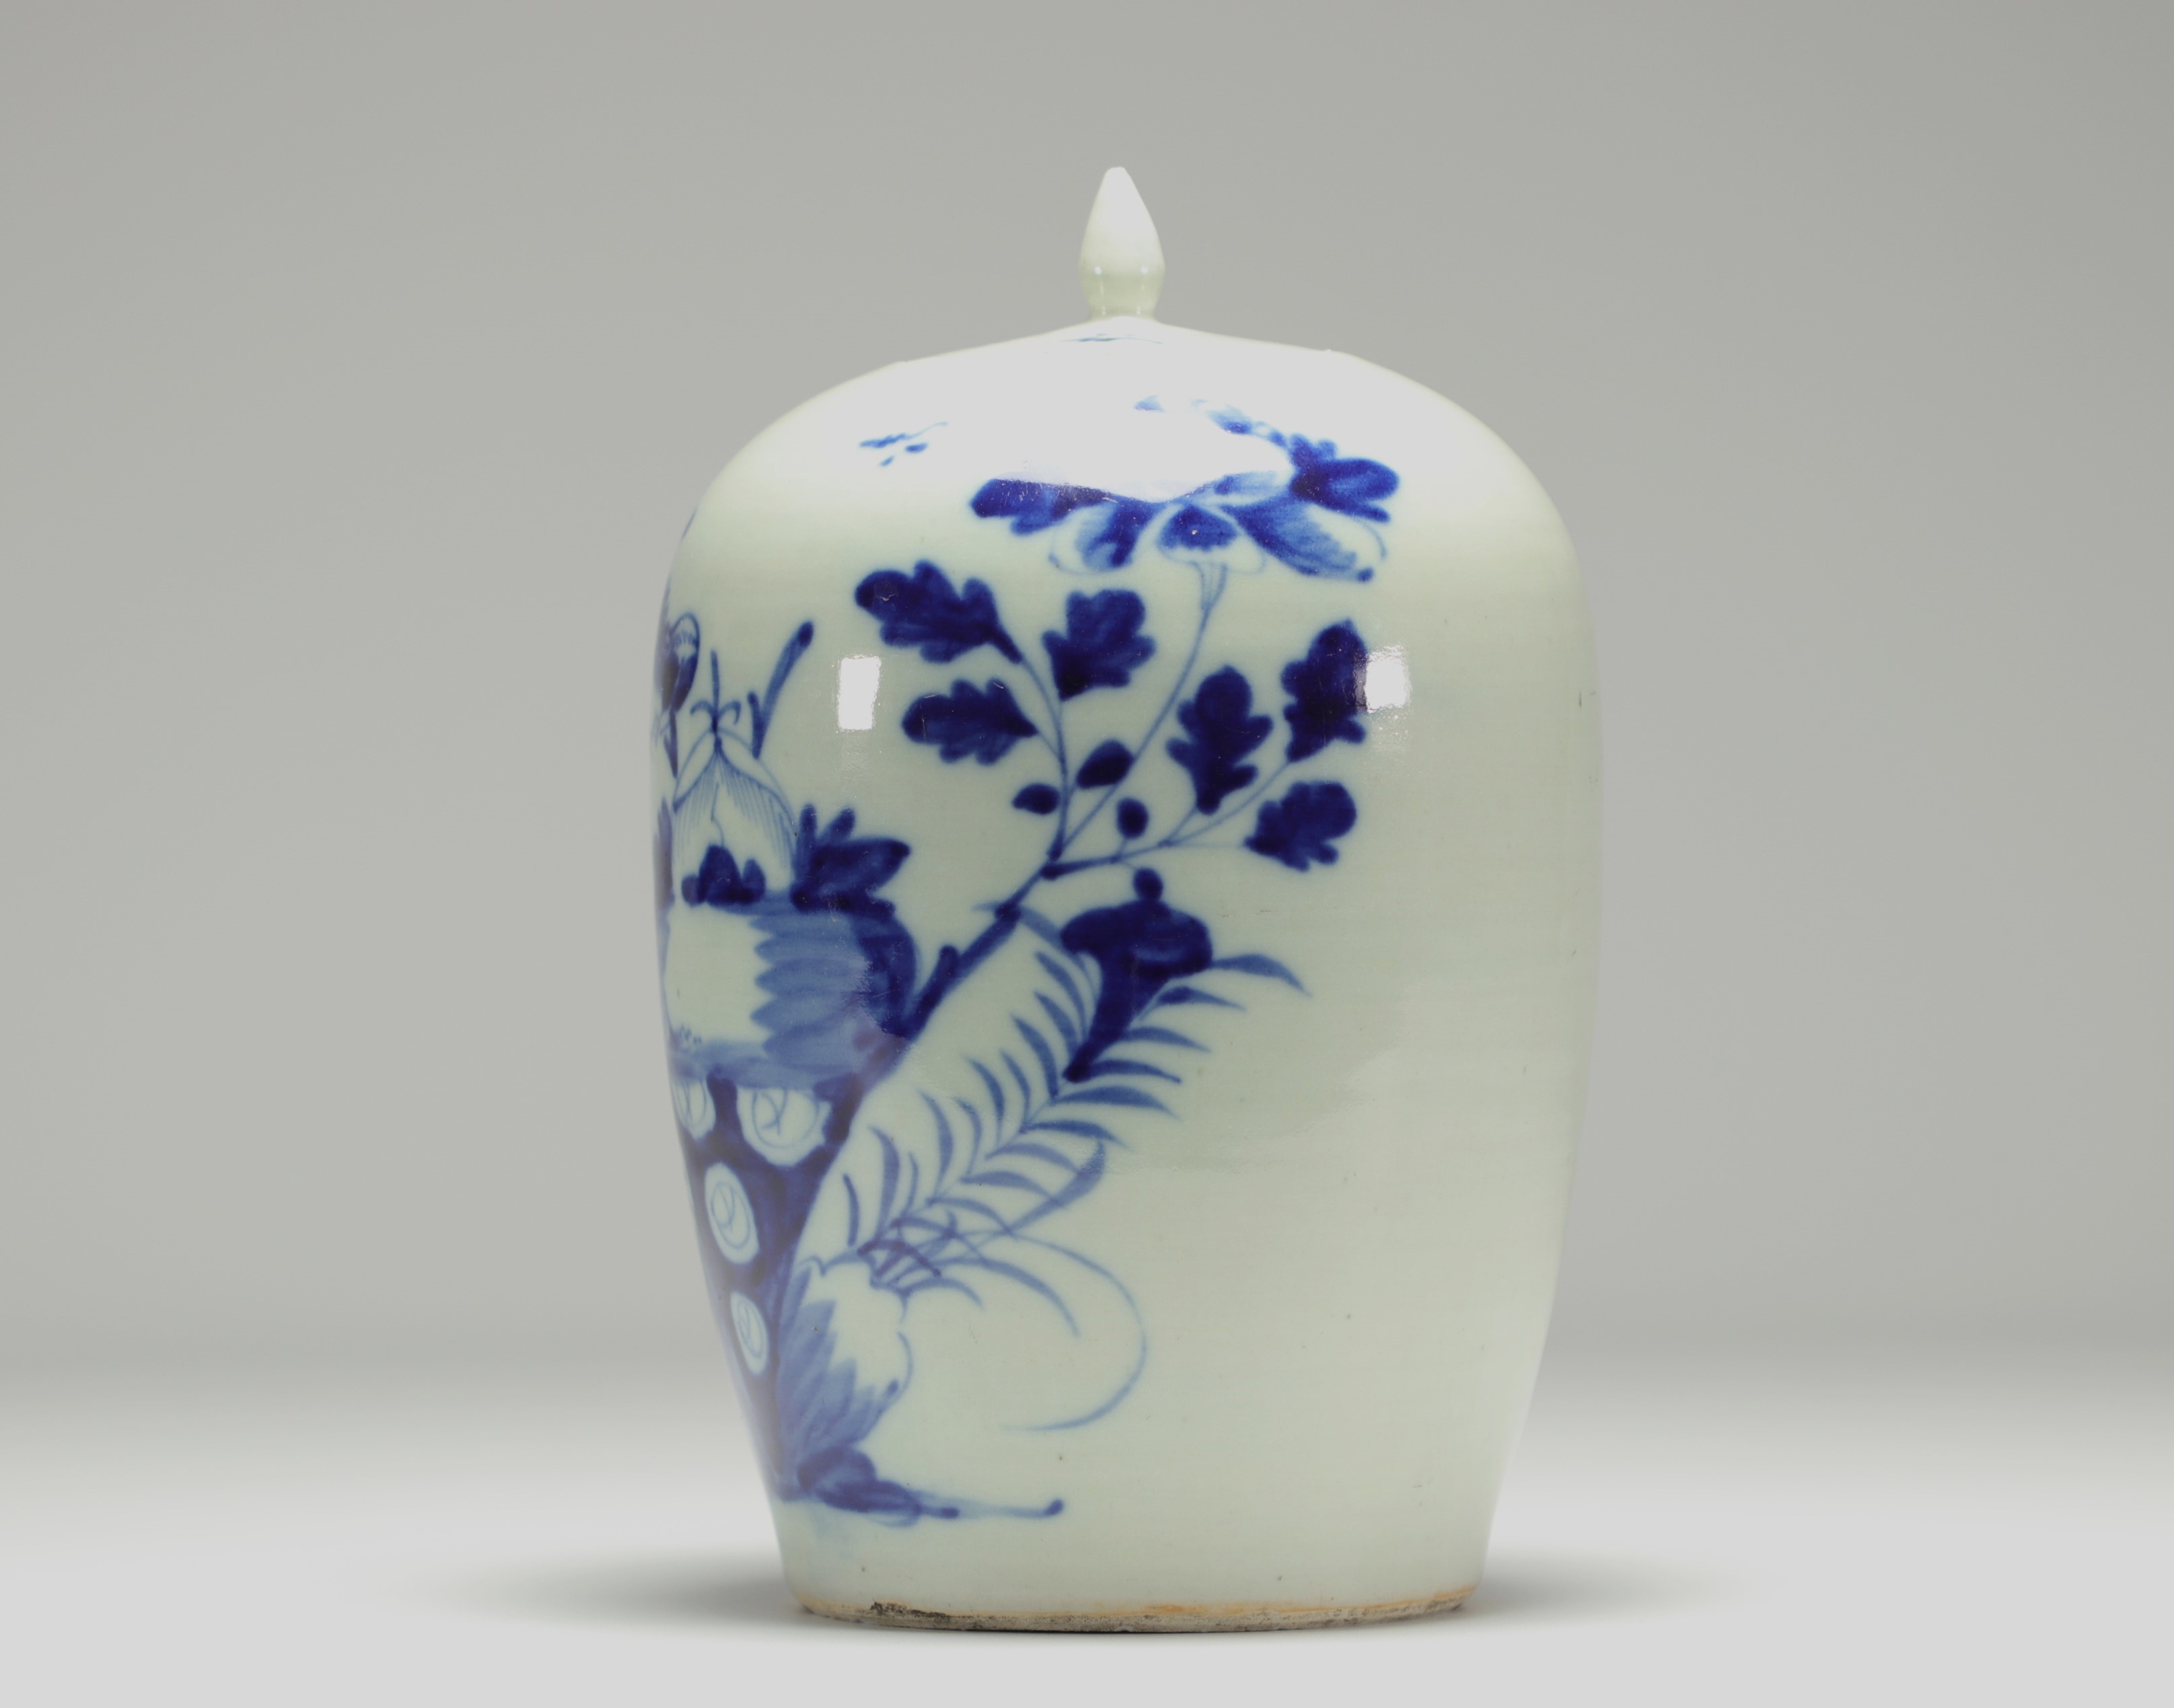 China - A blue-white porcelain ginger pot with floral decoration, 19th century. - Image 2 of 3